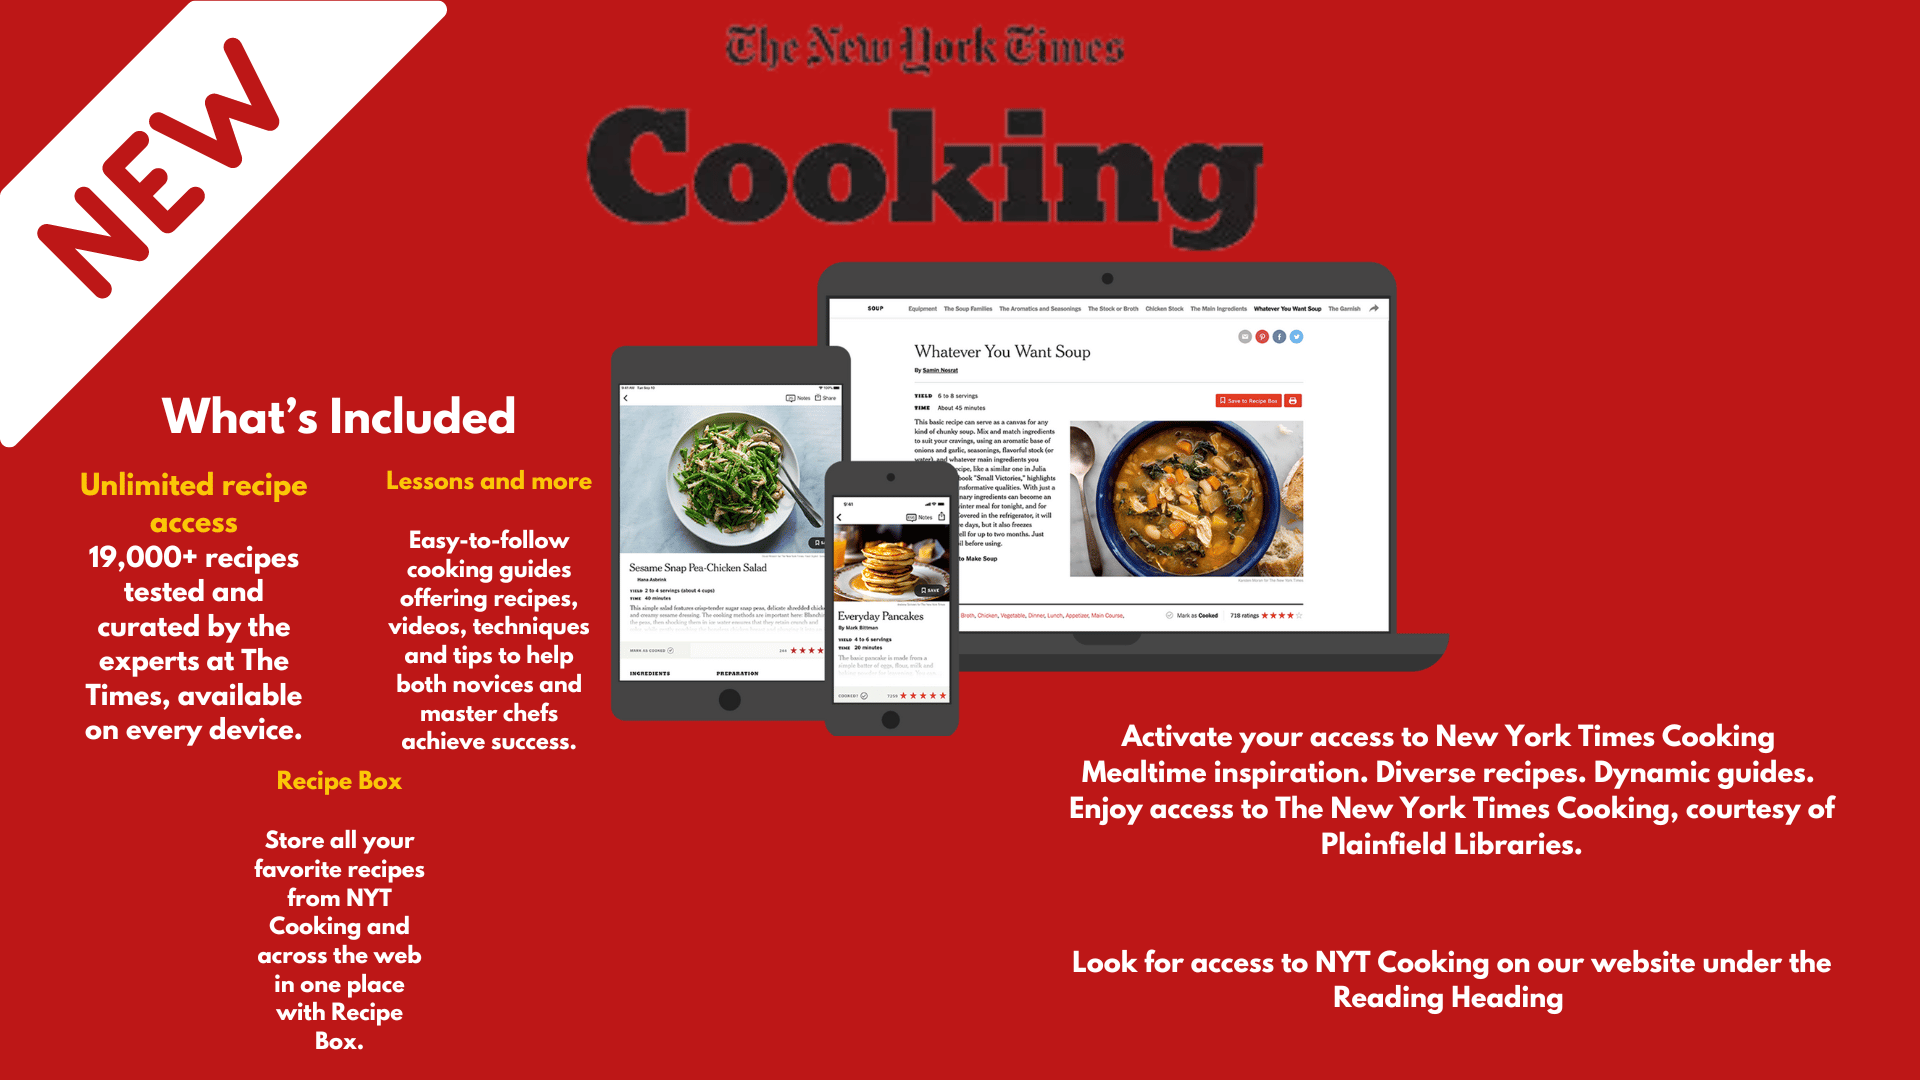 New York Times Cooking, Digital access,